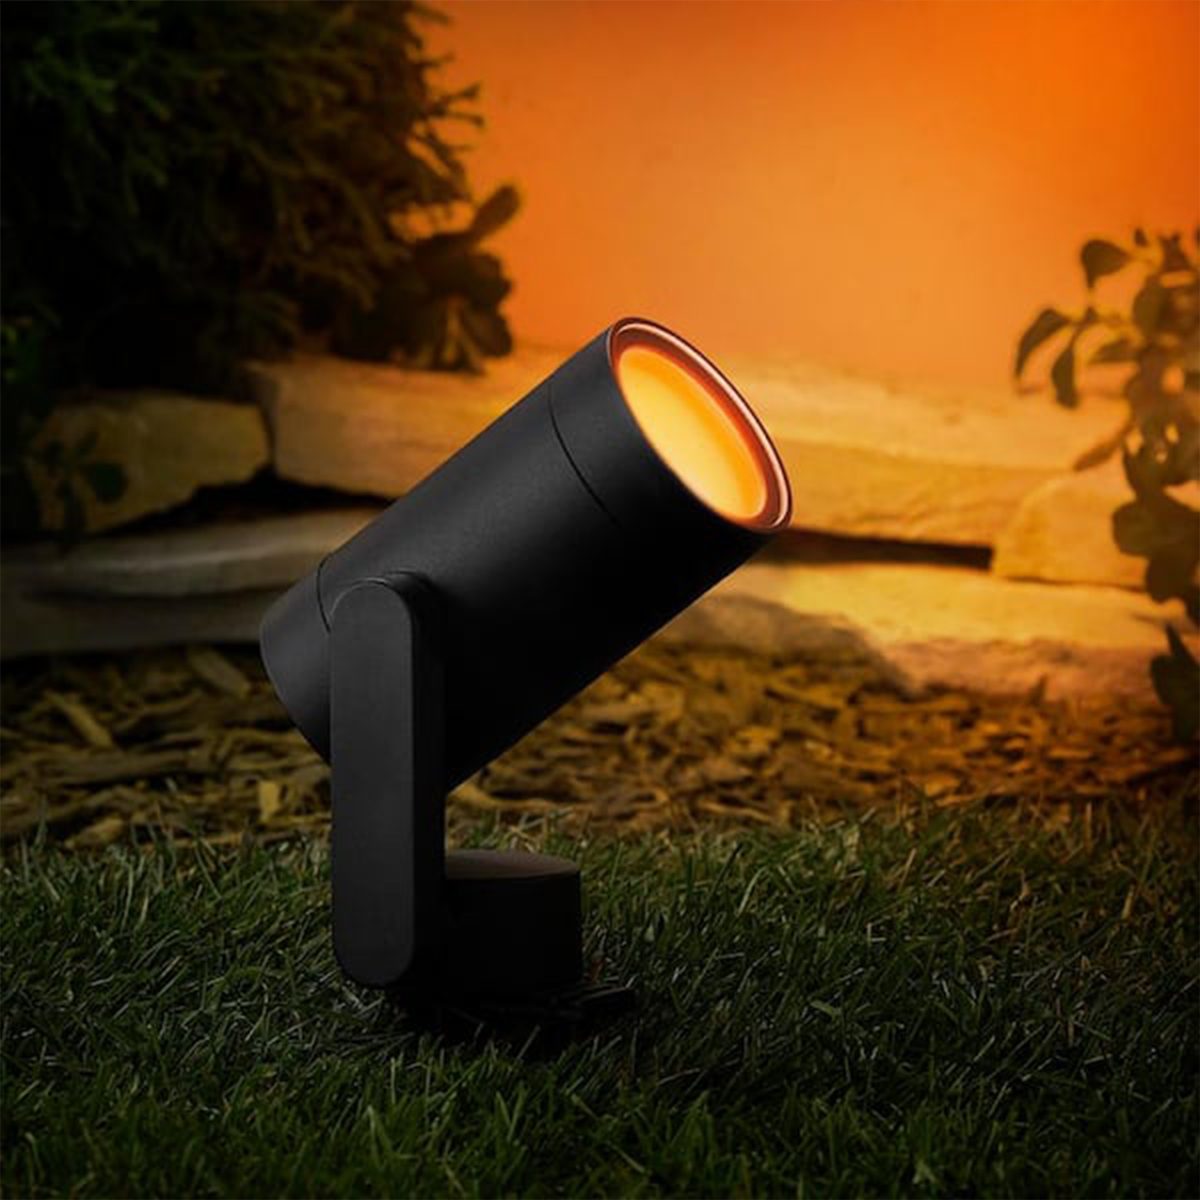 Enbrighten Outdoor Smart Lights review: Smart patio upgrades - 9to5Toys